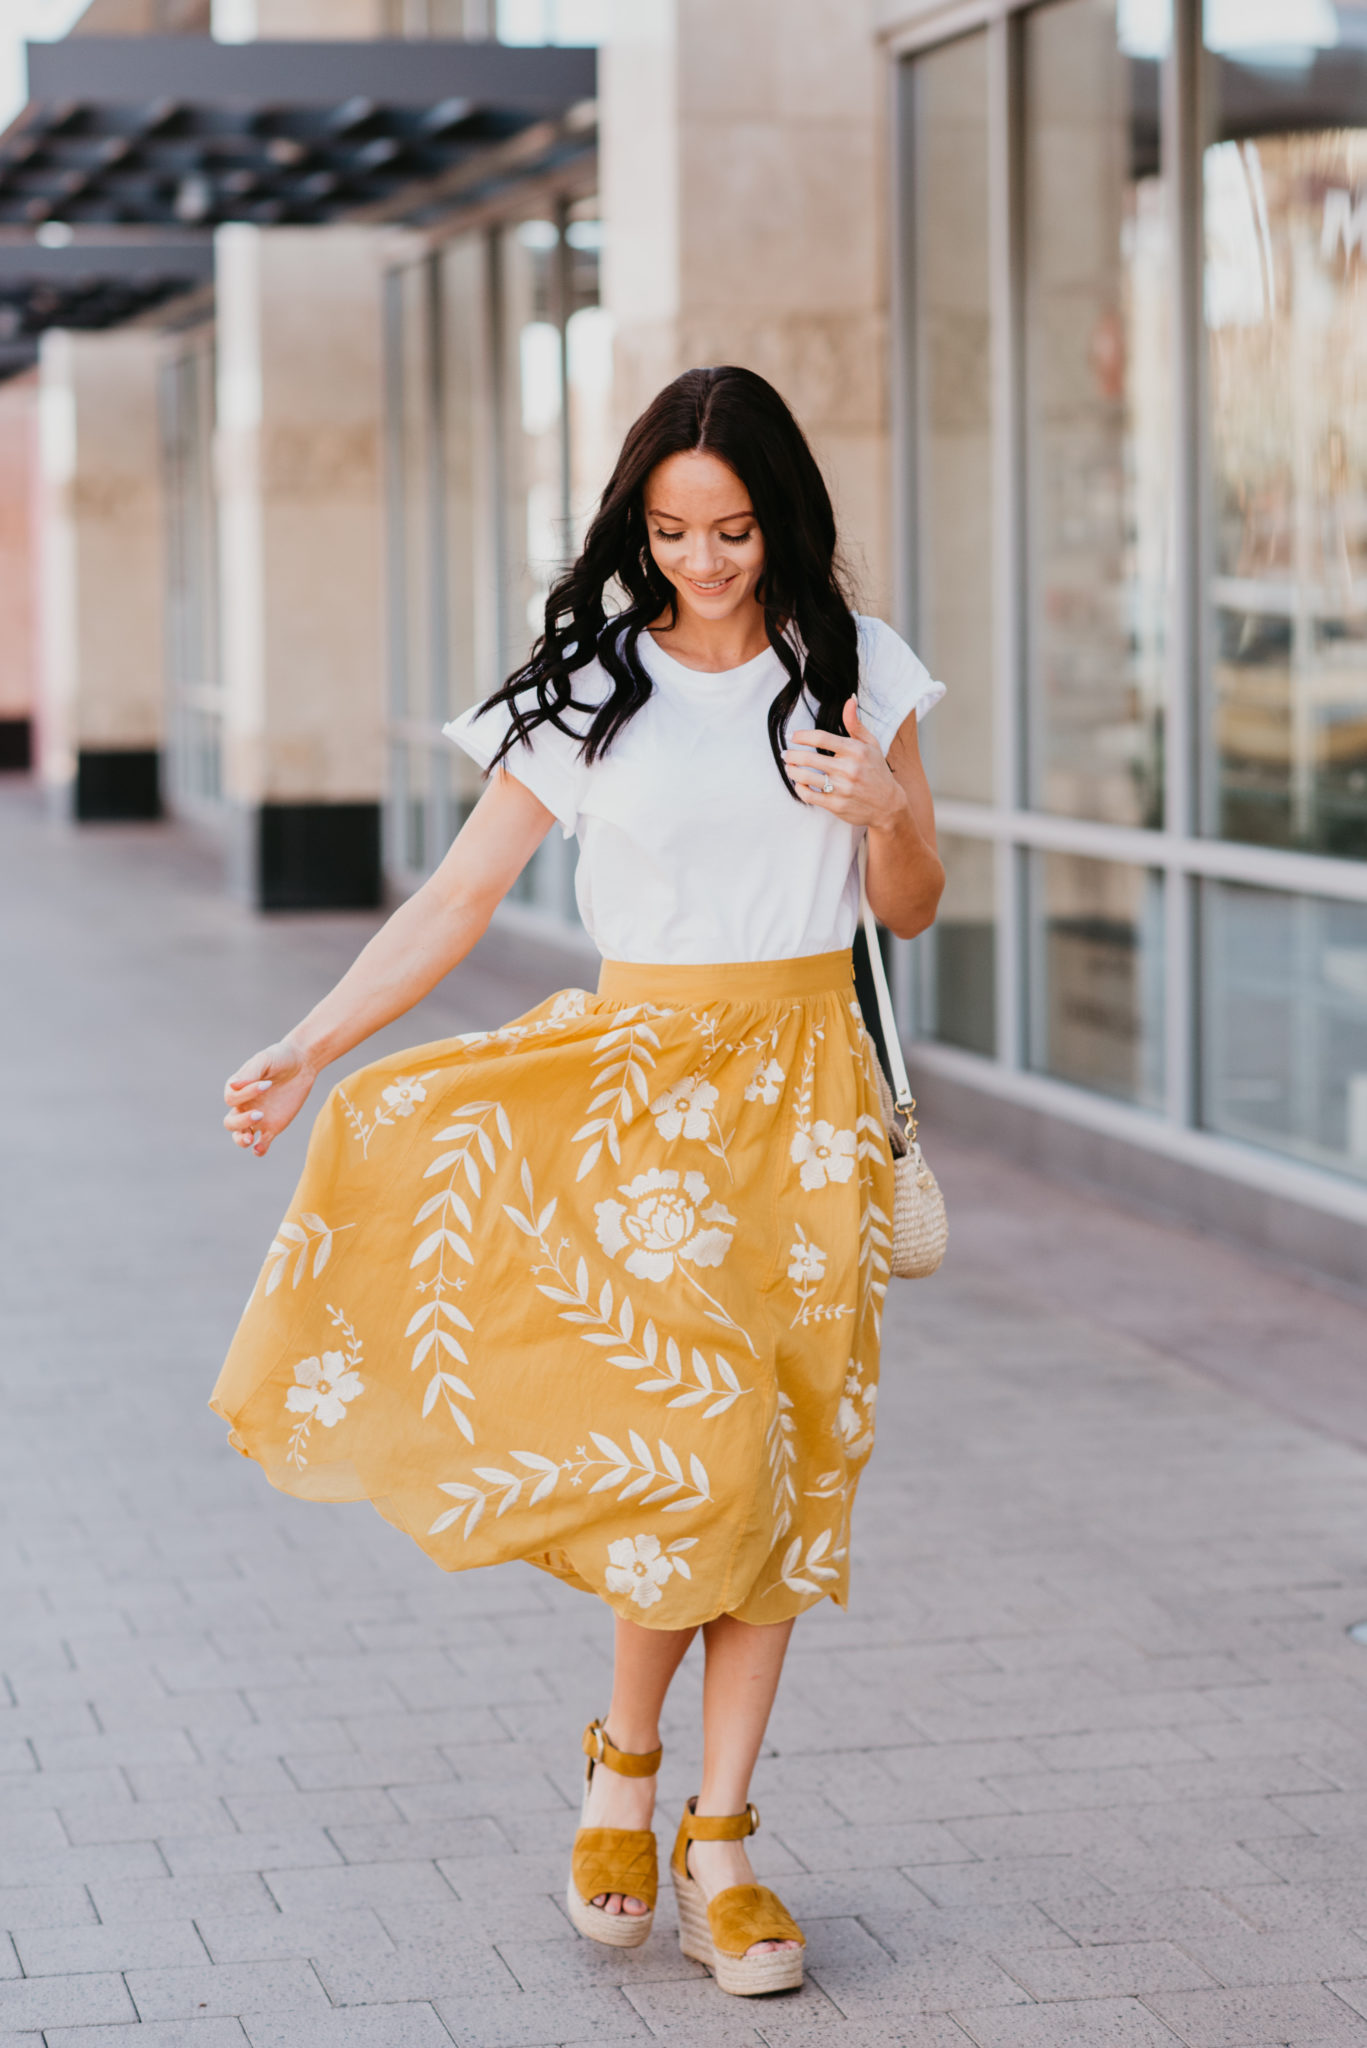 Cute Yellow Skirts for Spring featured by top US fashion blog, Outfits & Outings: image of a woman wearing a white top, yellow embroidered skirt and Marc Fisher espadrilles sandals